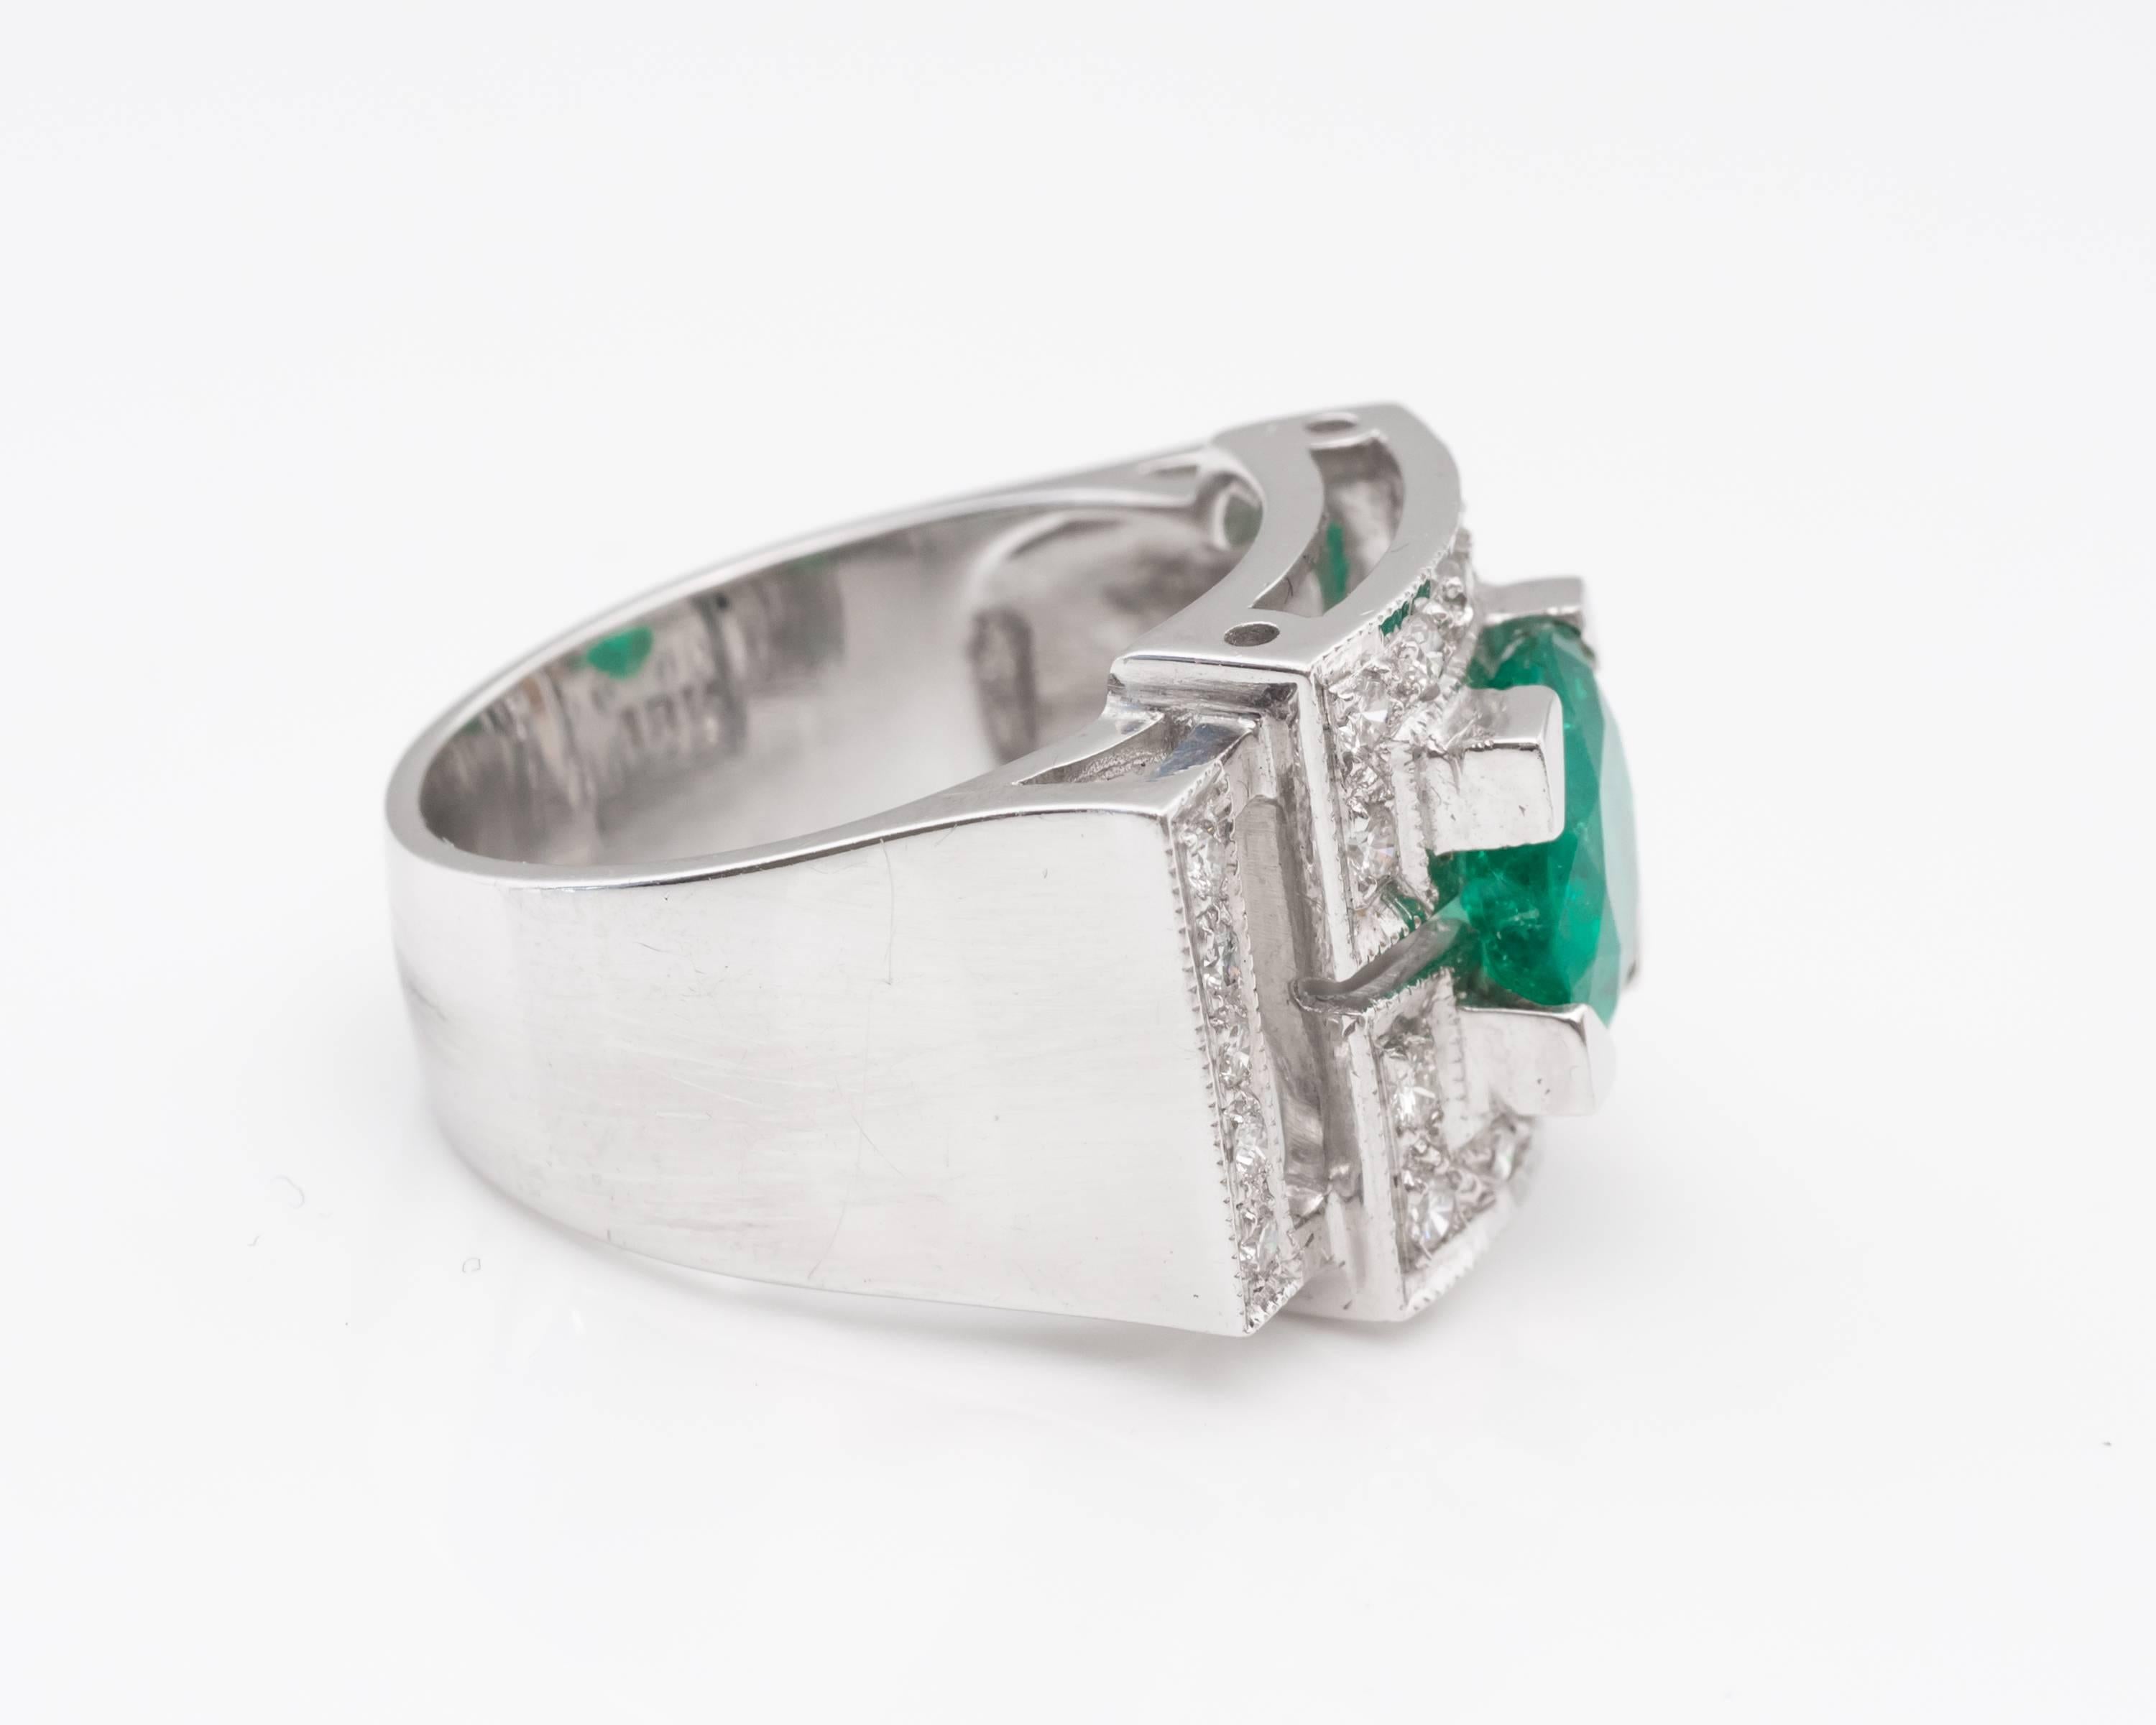 Immaculate 18 Karat White Gold Ring featuring Colombian Emerald and Diamond
Emerald is certified gemstone from Professional Gem Sciences Laboratory (Paperwork is accompanied with purchase), weighing 1.70 carats total. Set in Four Triangular Prongs